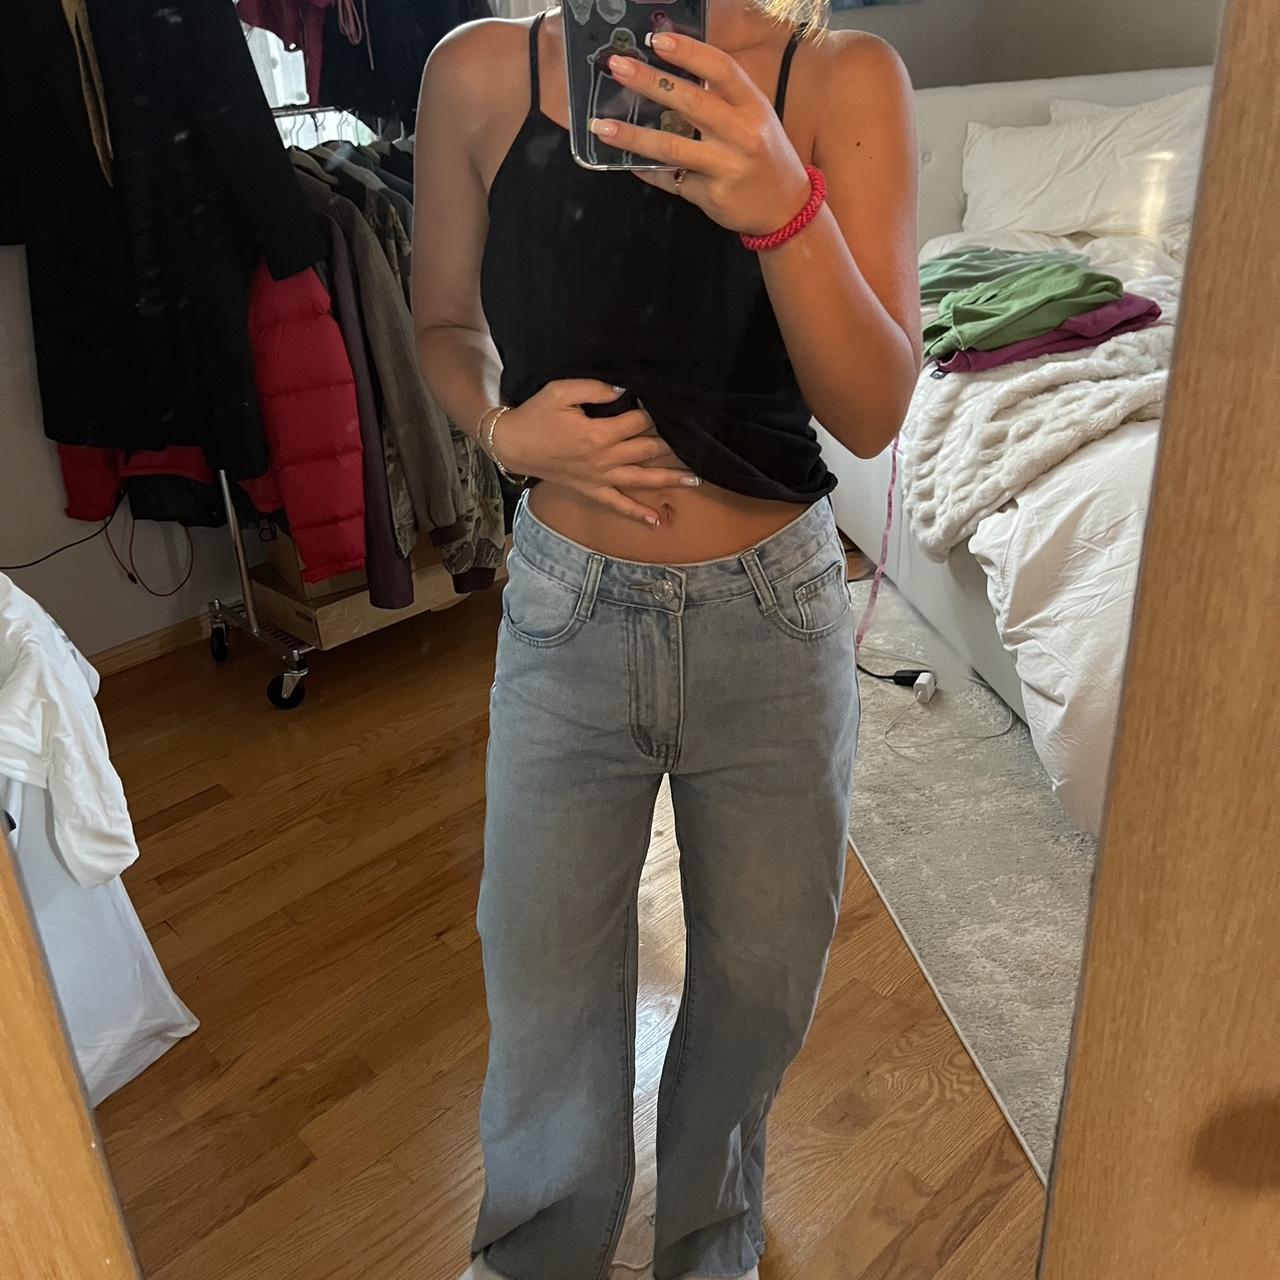 In love with this top and the fit of these jeans